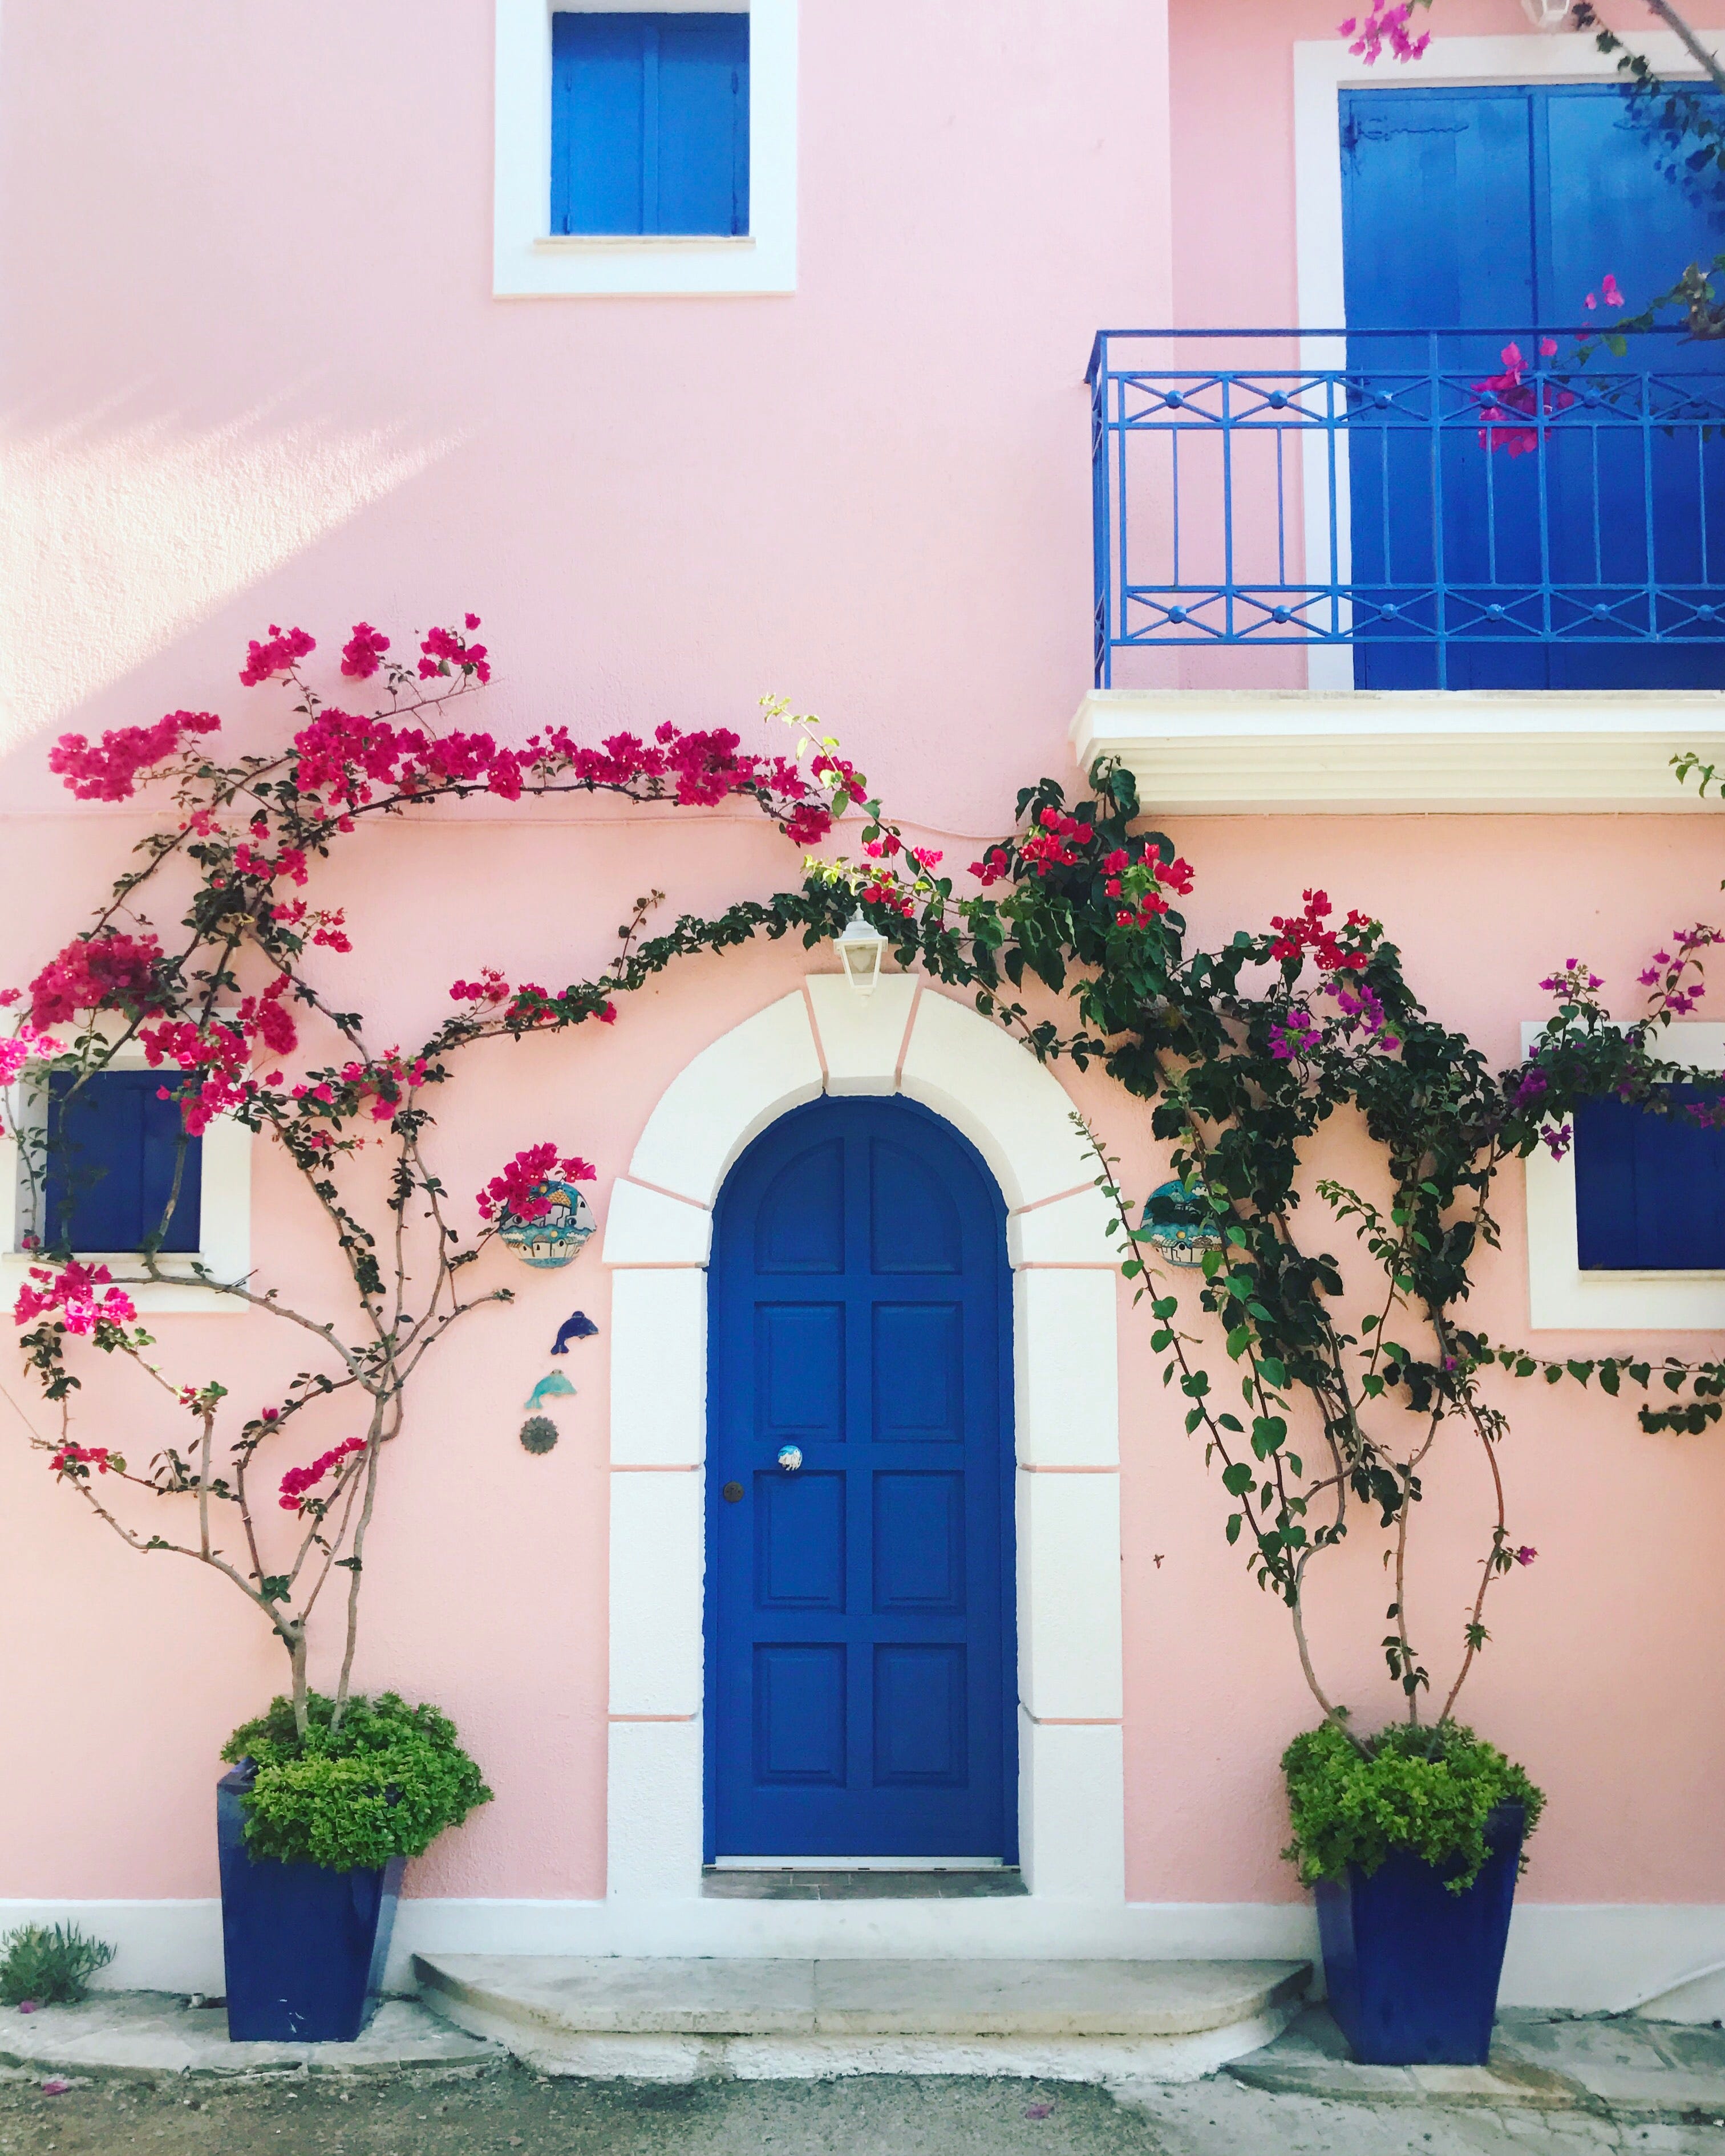 The 50 Best Exterior House Colors for Serious Curb Appeal